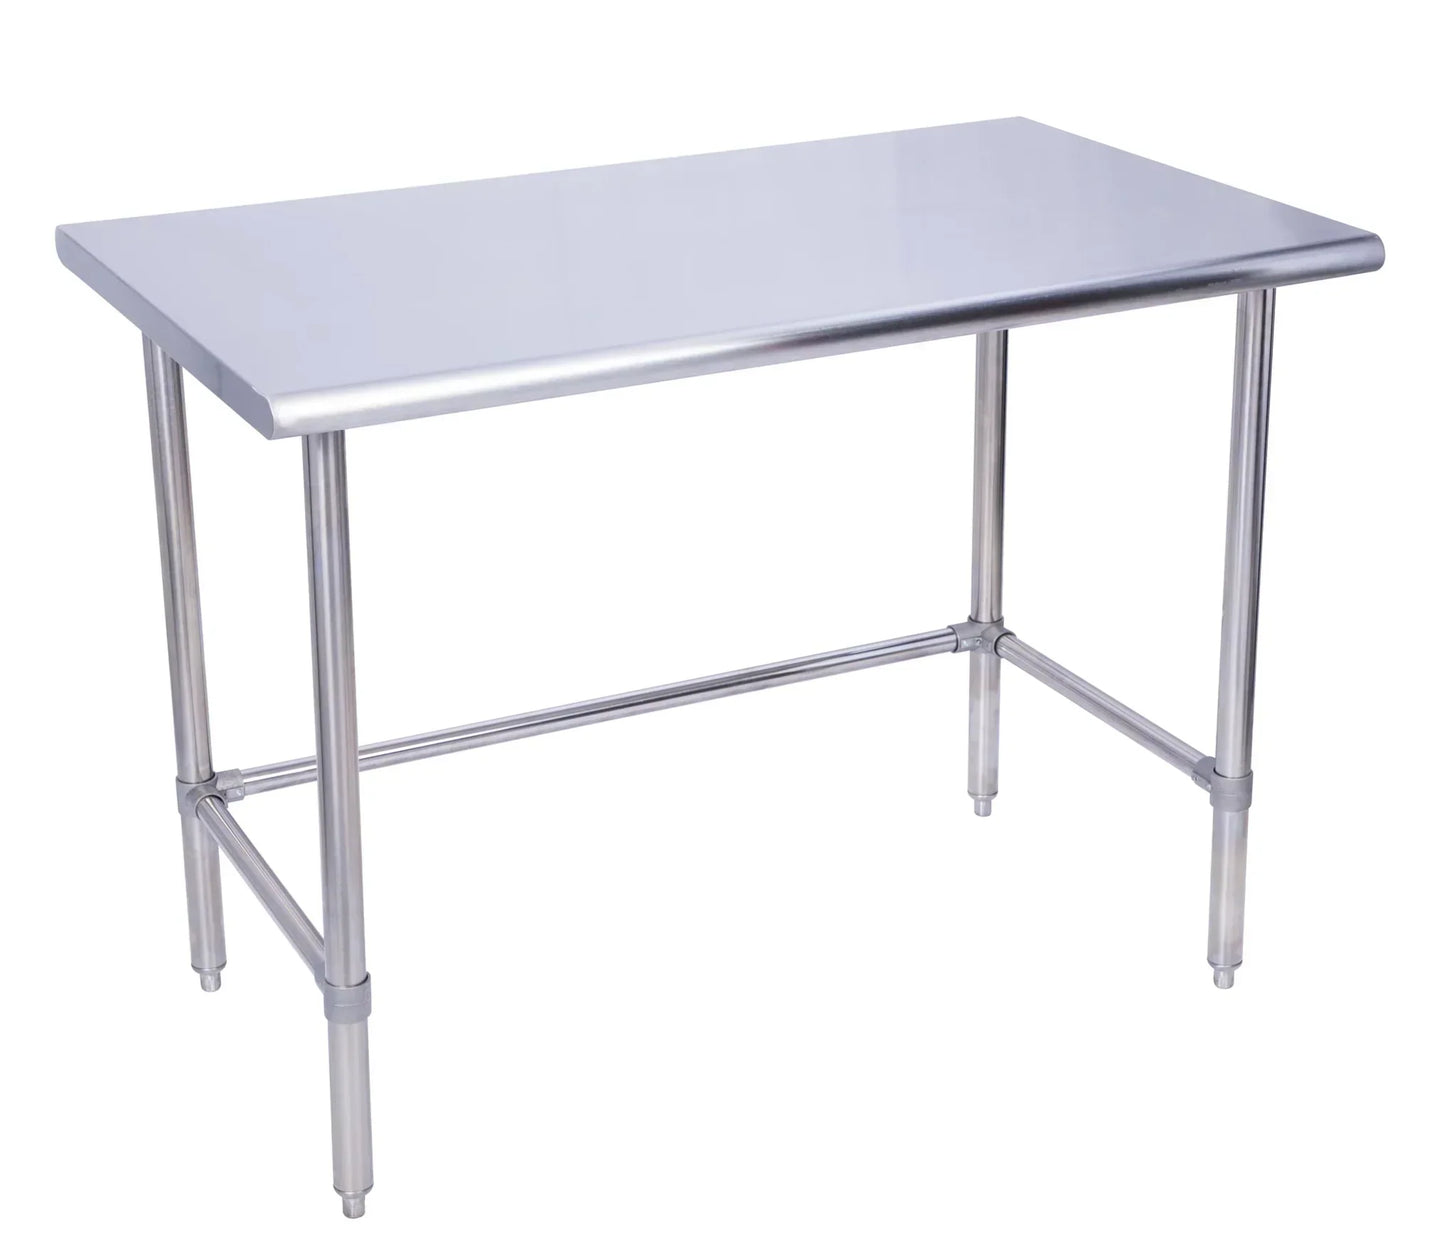 KCS WSCB-3048 30" x 48" Stainless Steel Work Table With Cross Bar